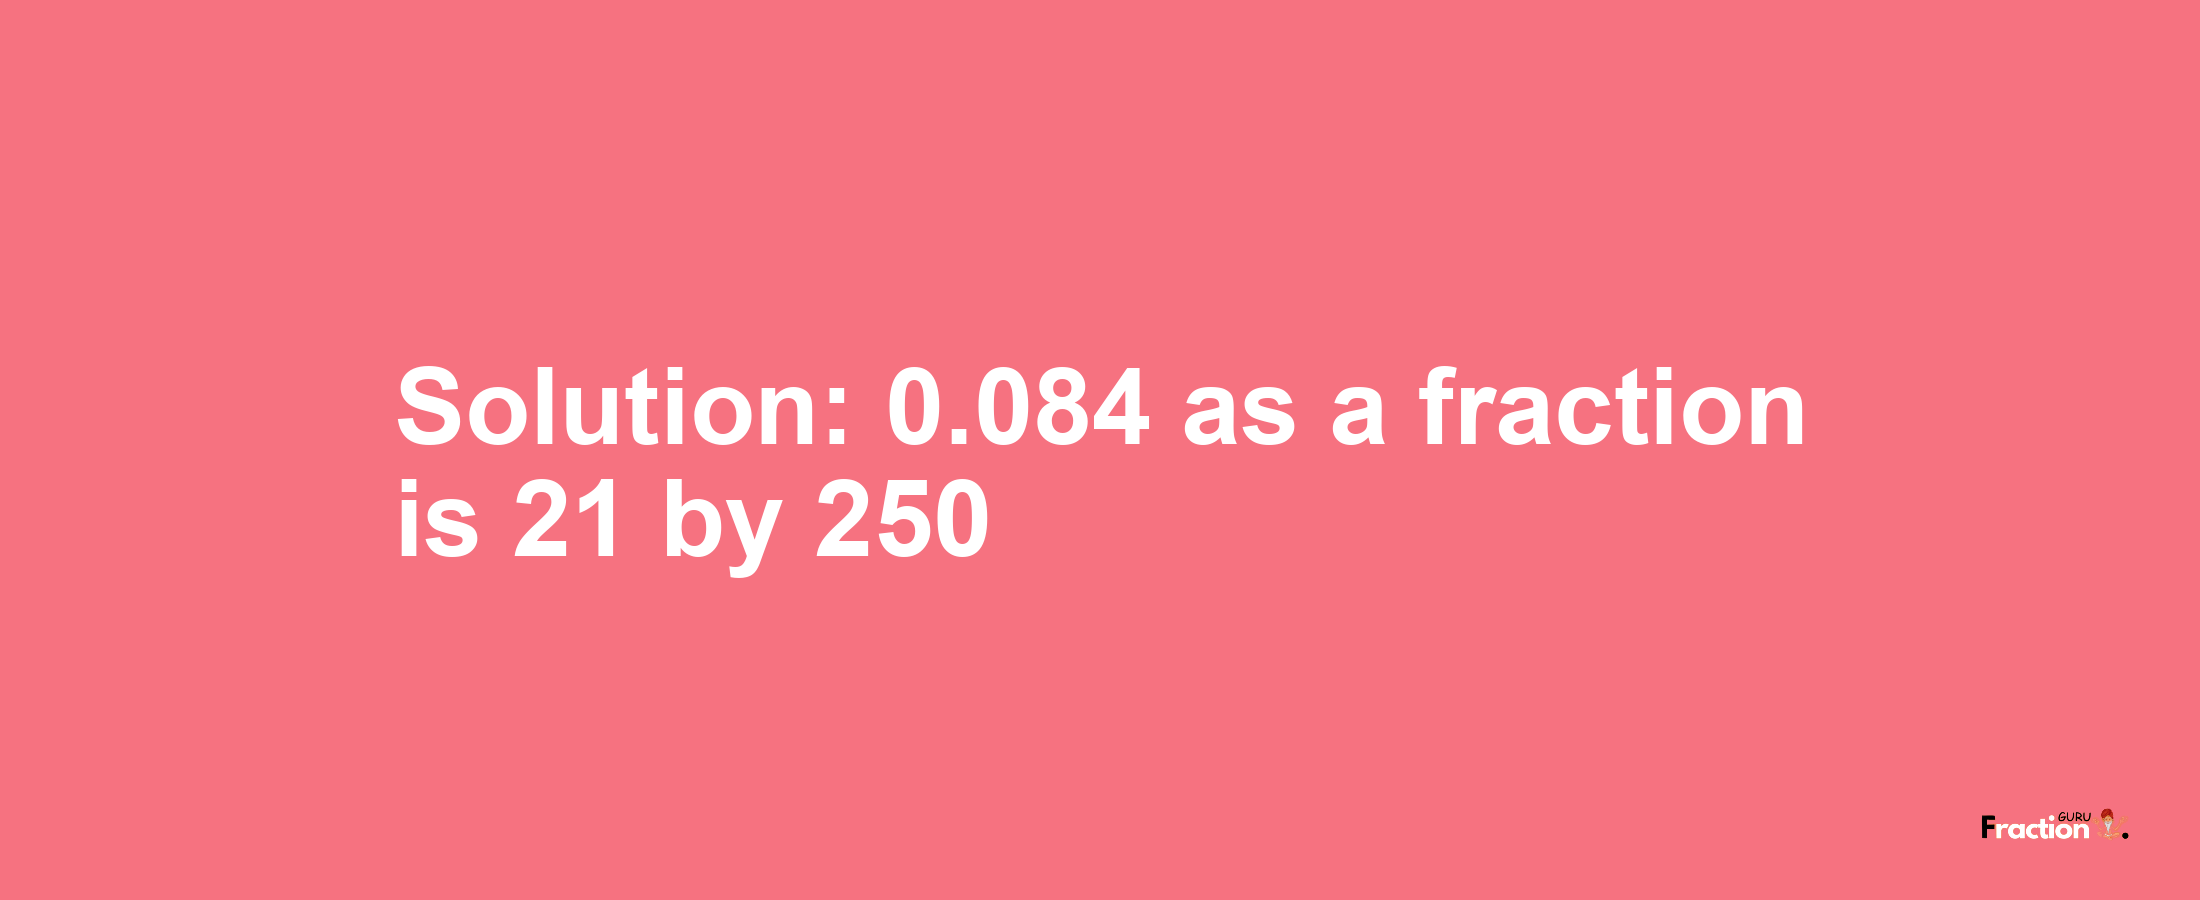 Solution:0.084 as a fraction is 21/250